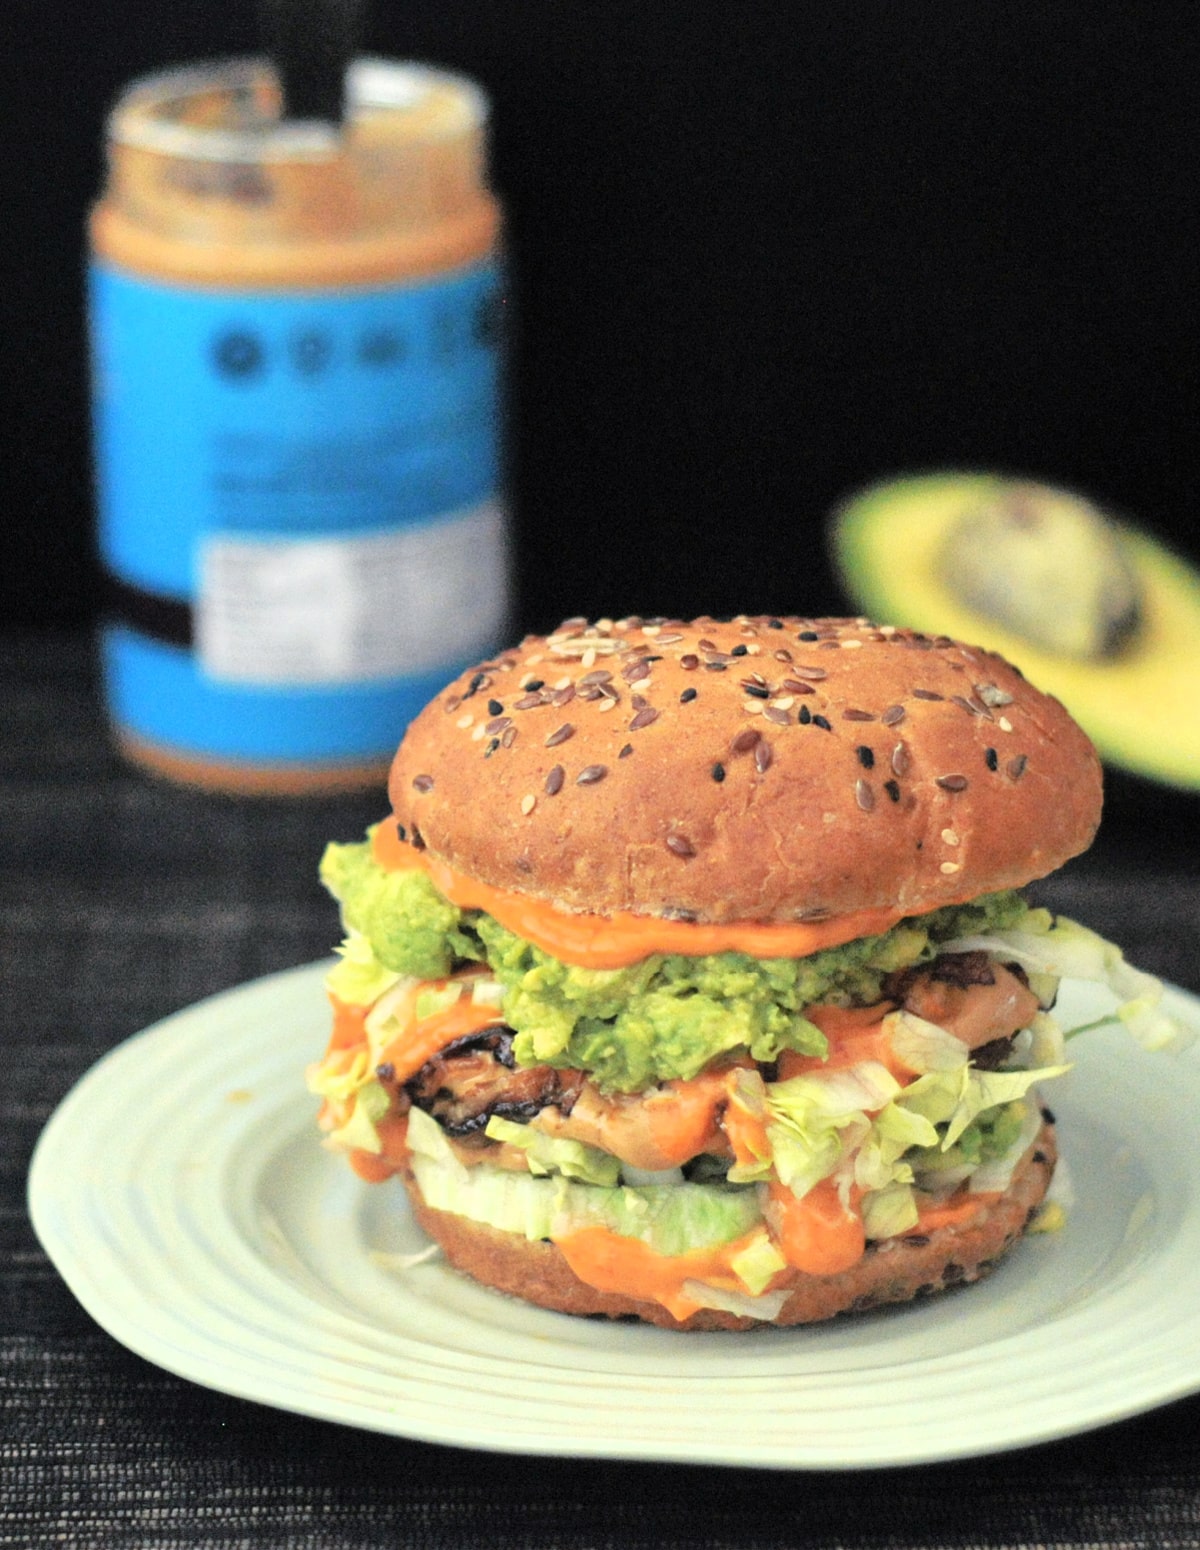 a spicy peanut butter burger on a light green plate against a black background; burger has bright orange spicy kimchi sauce, shredded iceberg lettuce, a veggie patty, mashed avocado, and a seeded bun. a jar of peanut butter and half an avocado blurred in background.